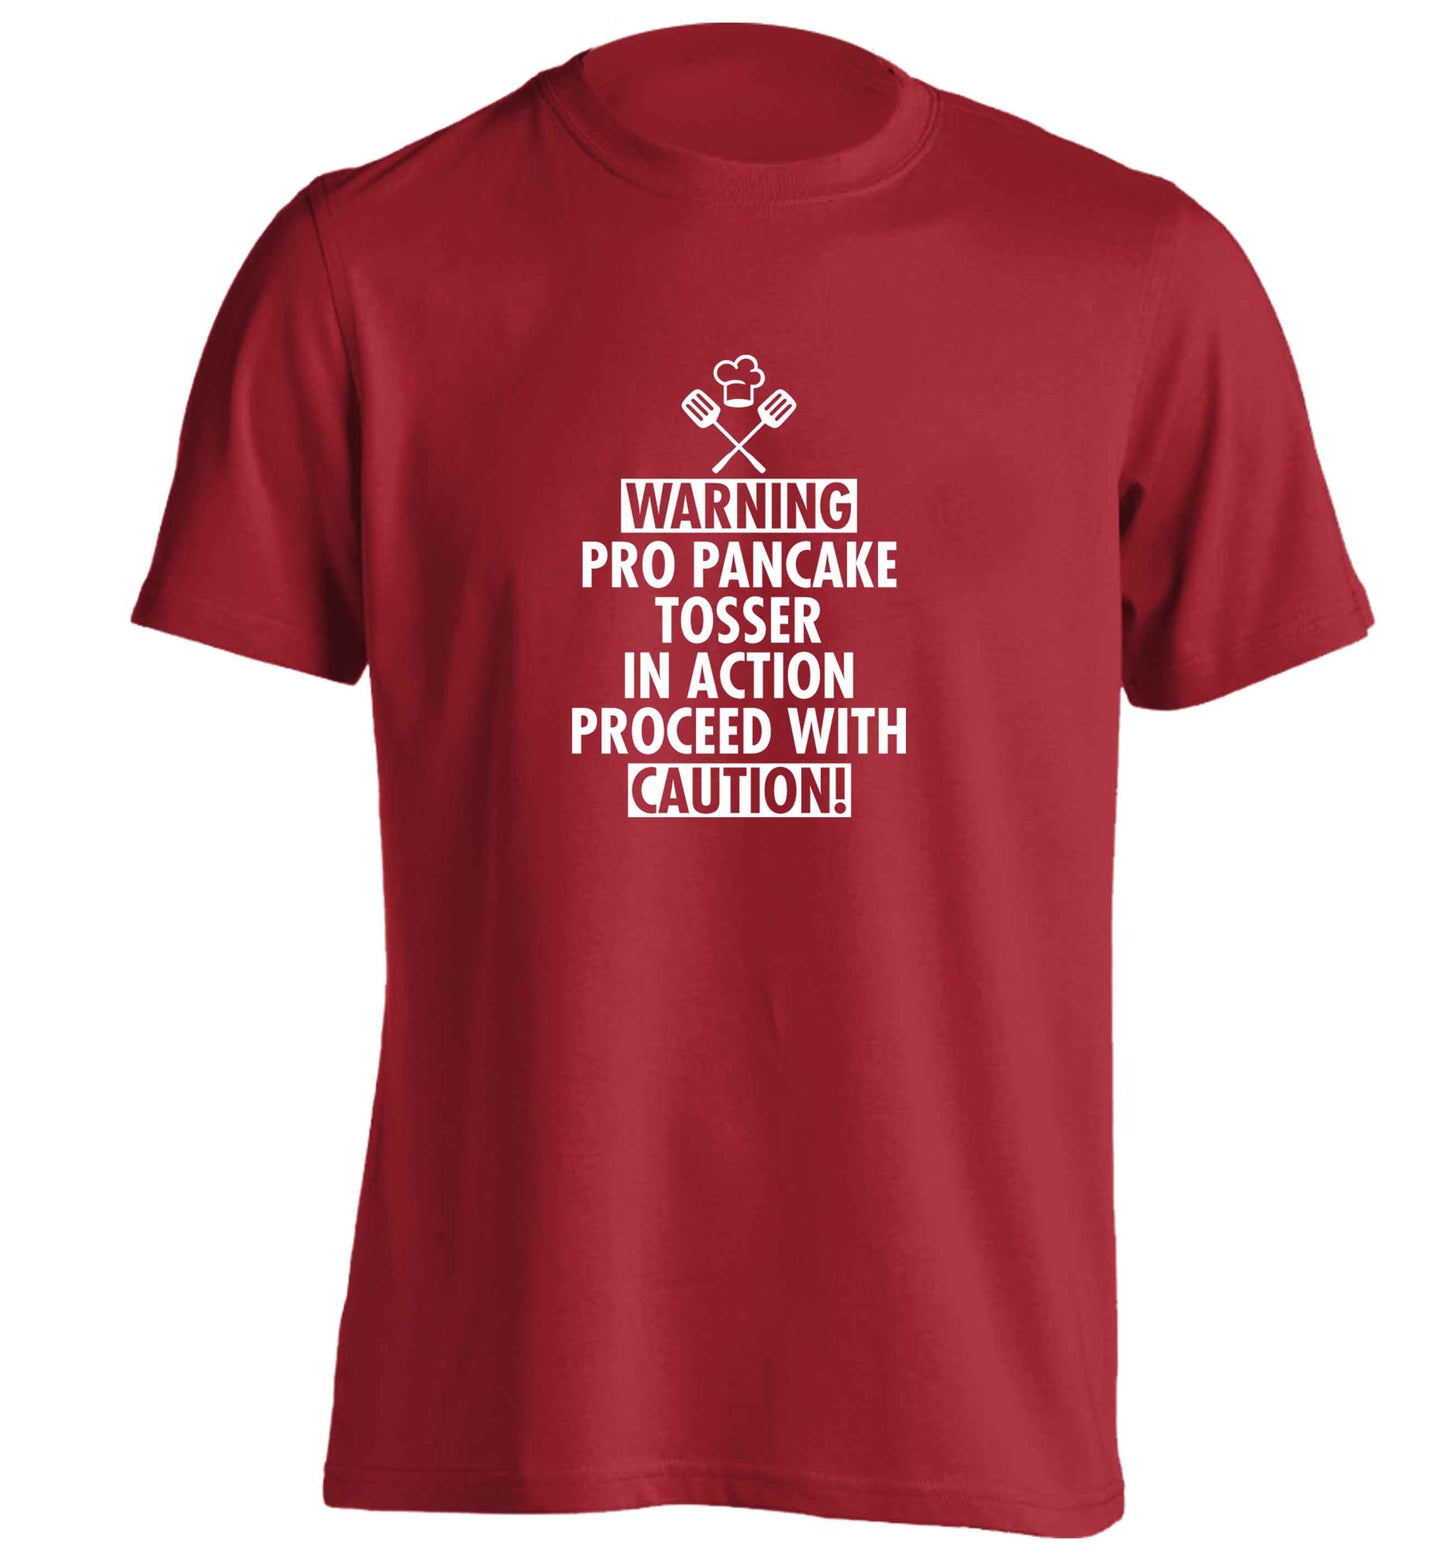 Warning pro pancake tosser in action proceed with caution adults unisex red Tshirt 2XL